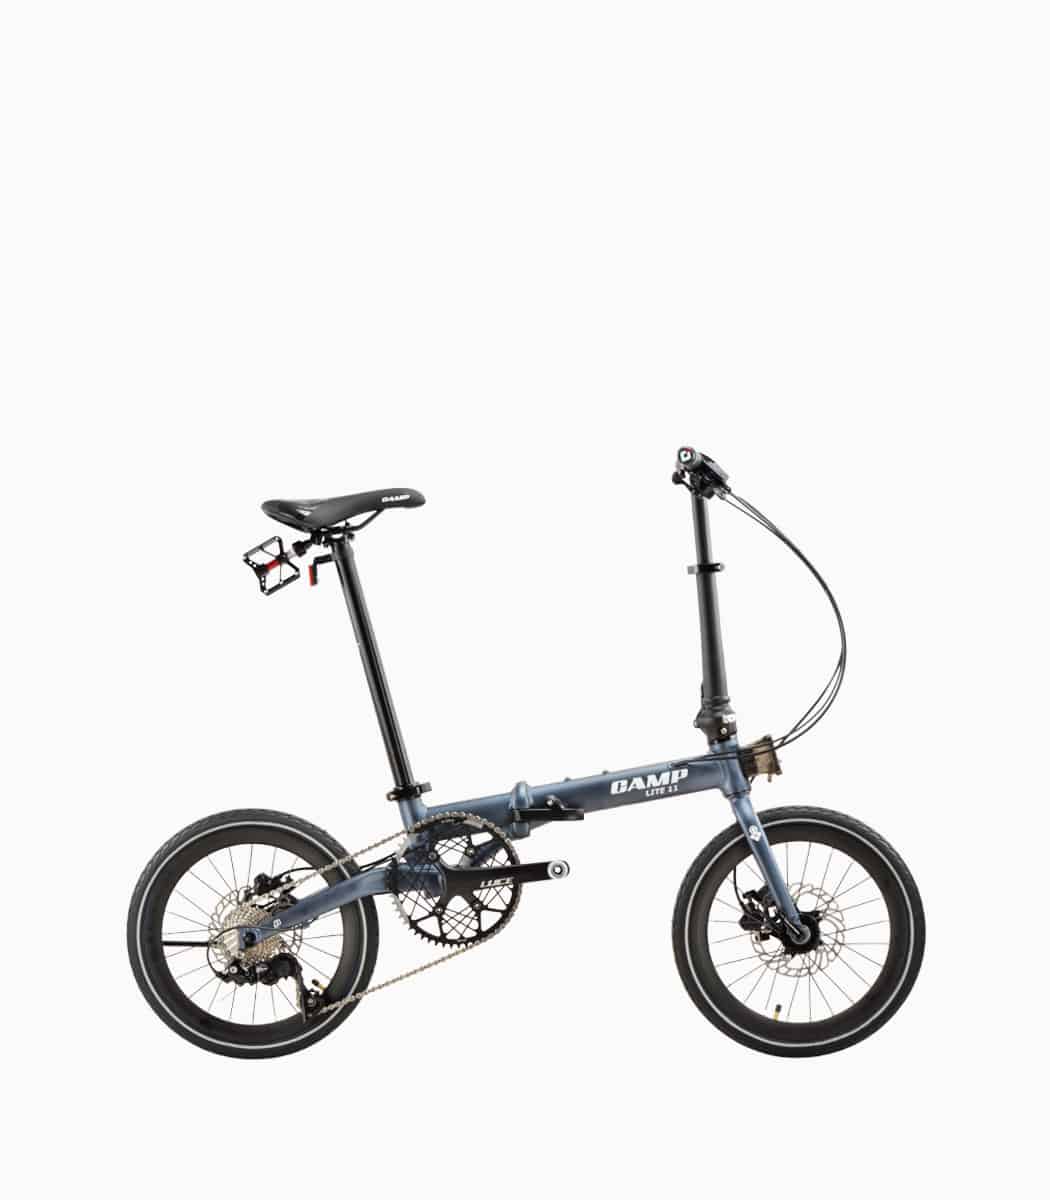 CAMP Lite 11 (SPACE GREY) foldable bicycle with reflective tyres right